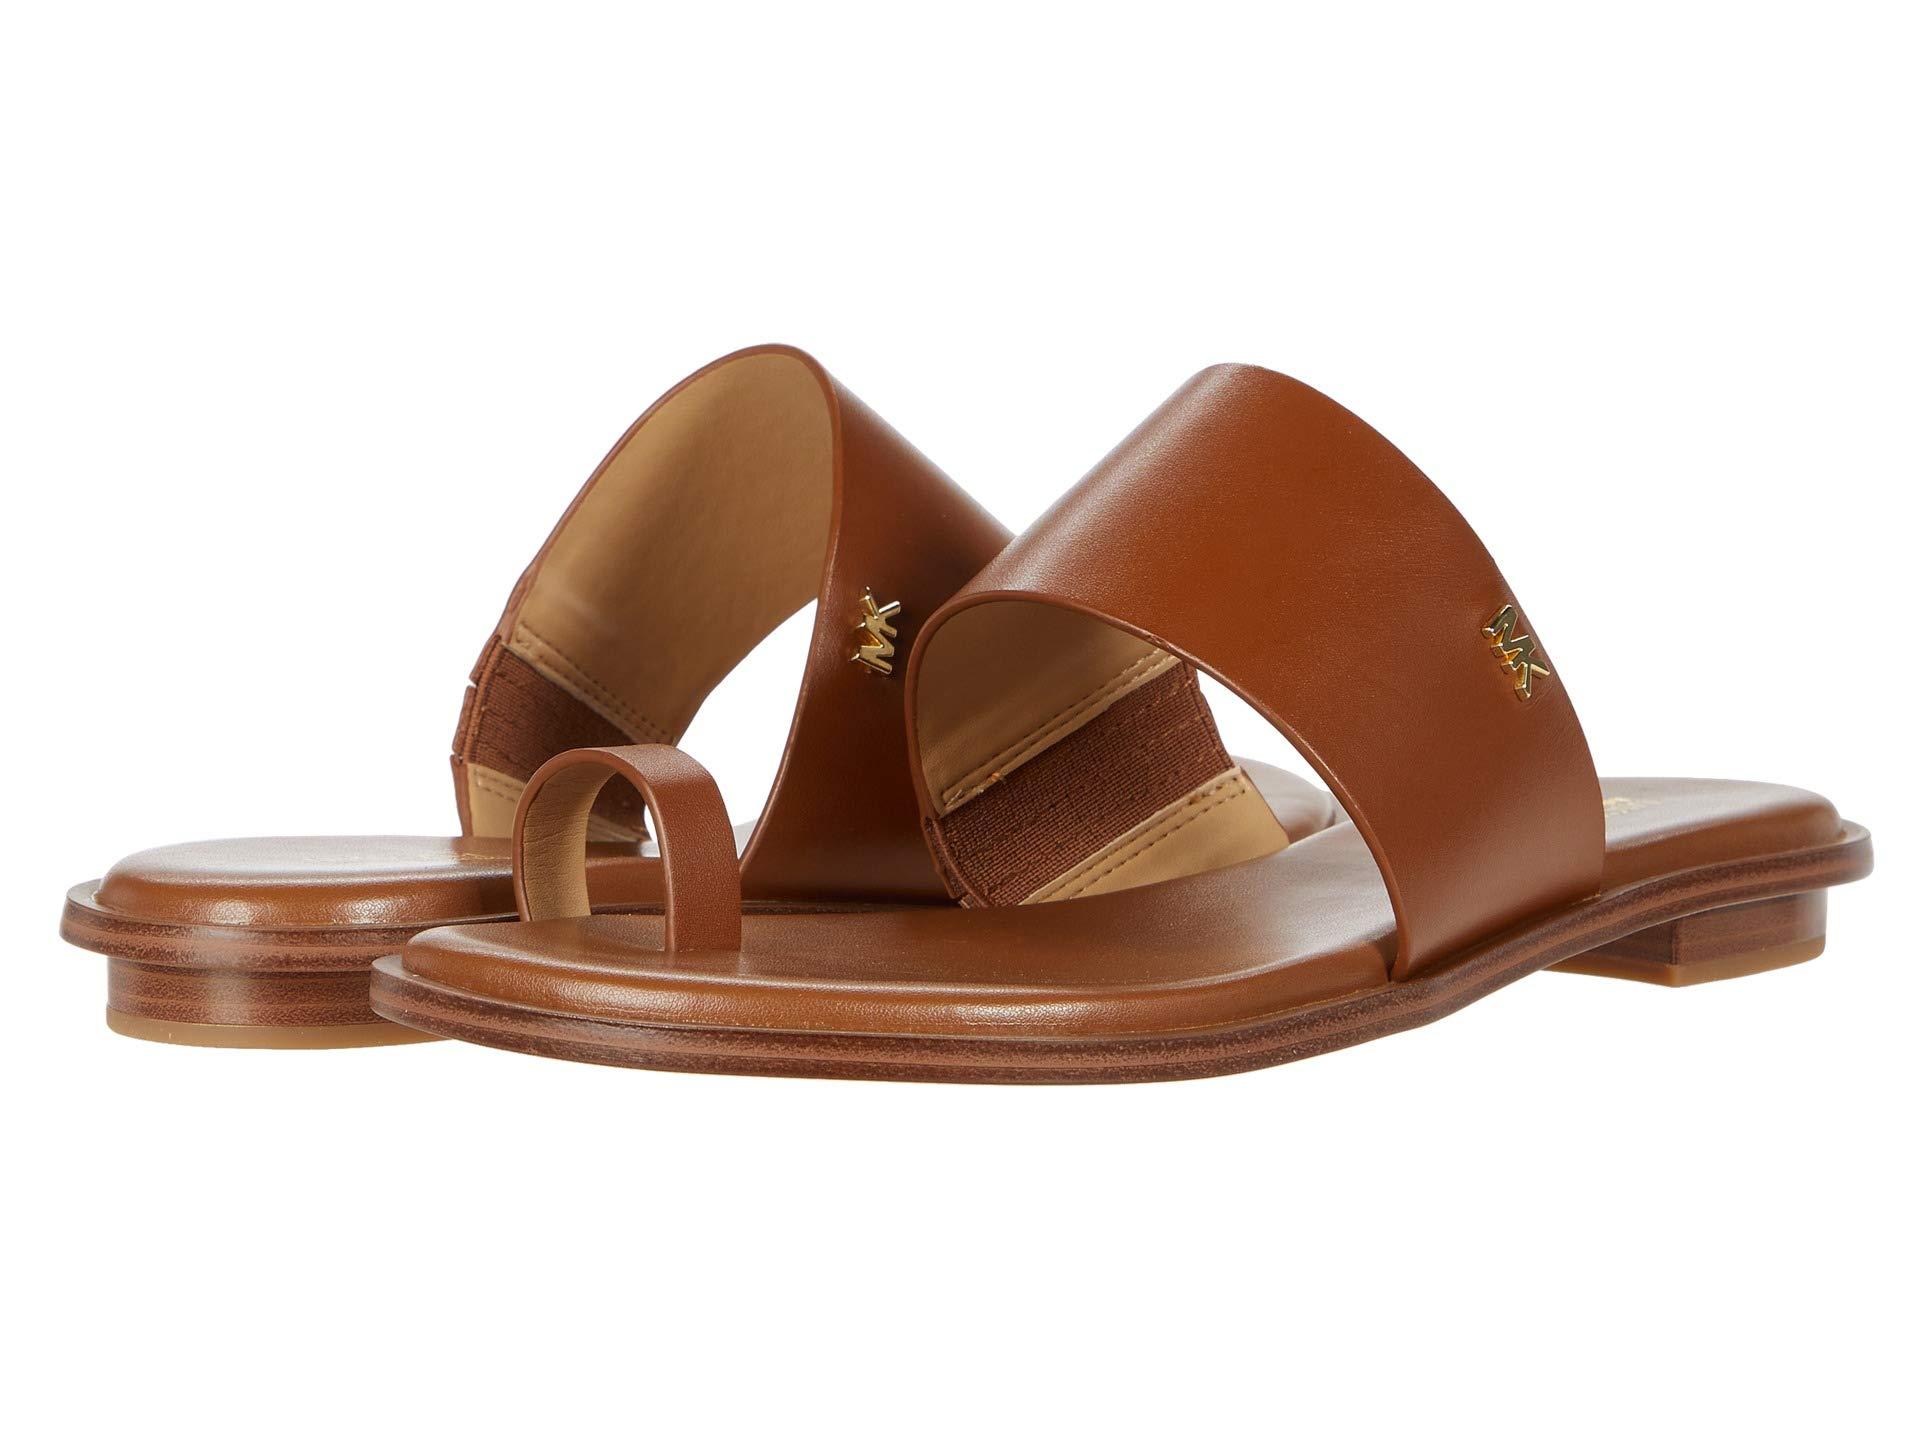 MICHAEL Kors Leather August Sandal in Brown - Lyst